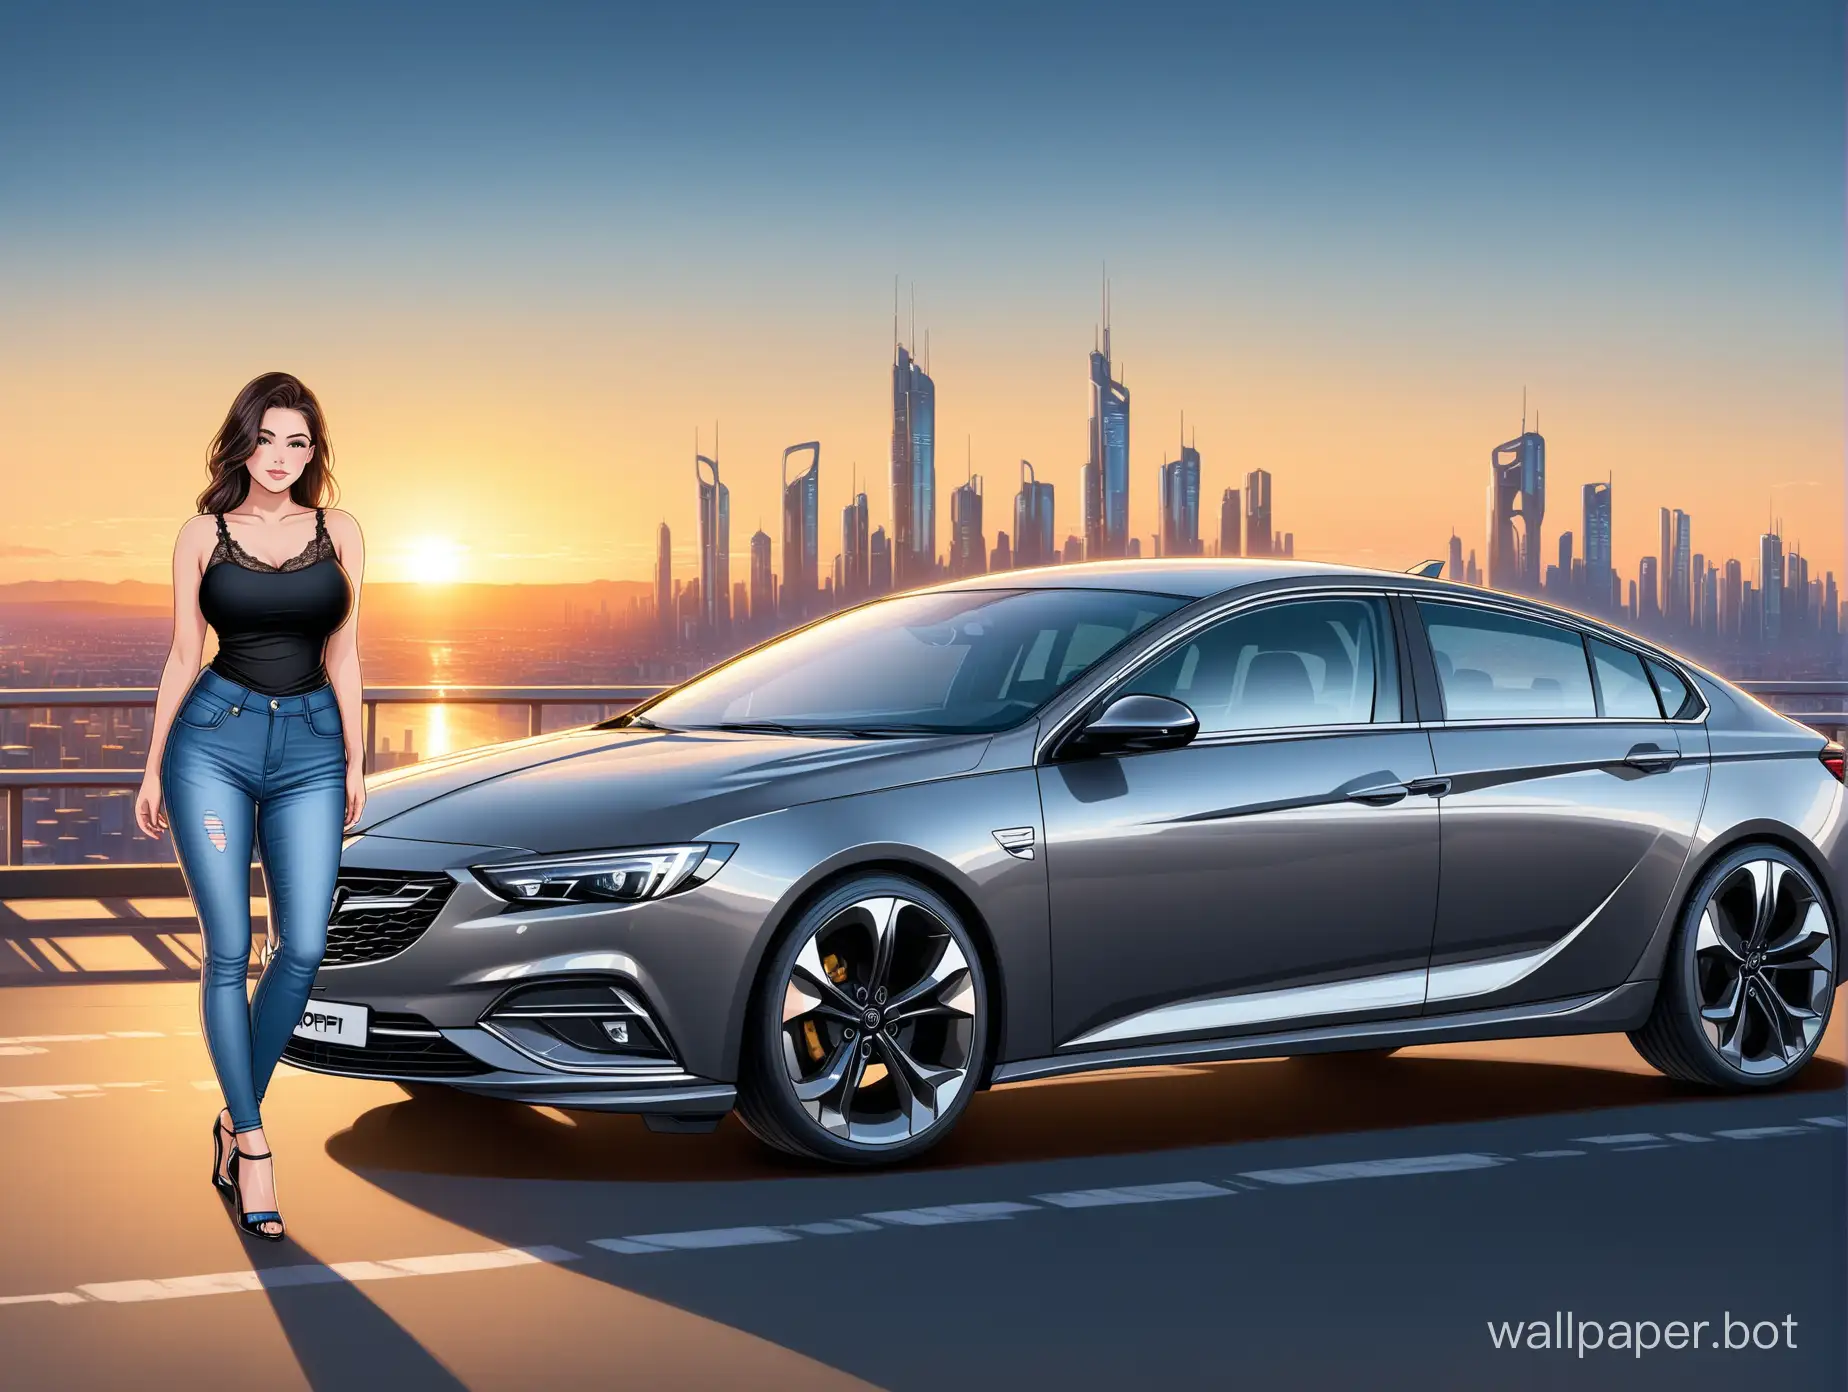 curvy brunette in jeans and black tank top with lace, high heels standing next to a opel insignia grand sport in steel color with a futuristic city at sundown in the background,